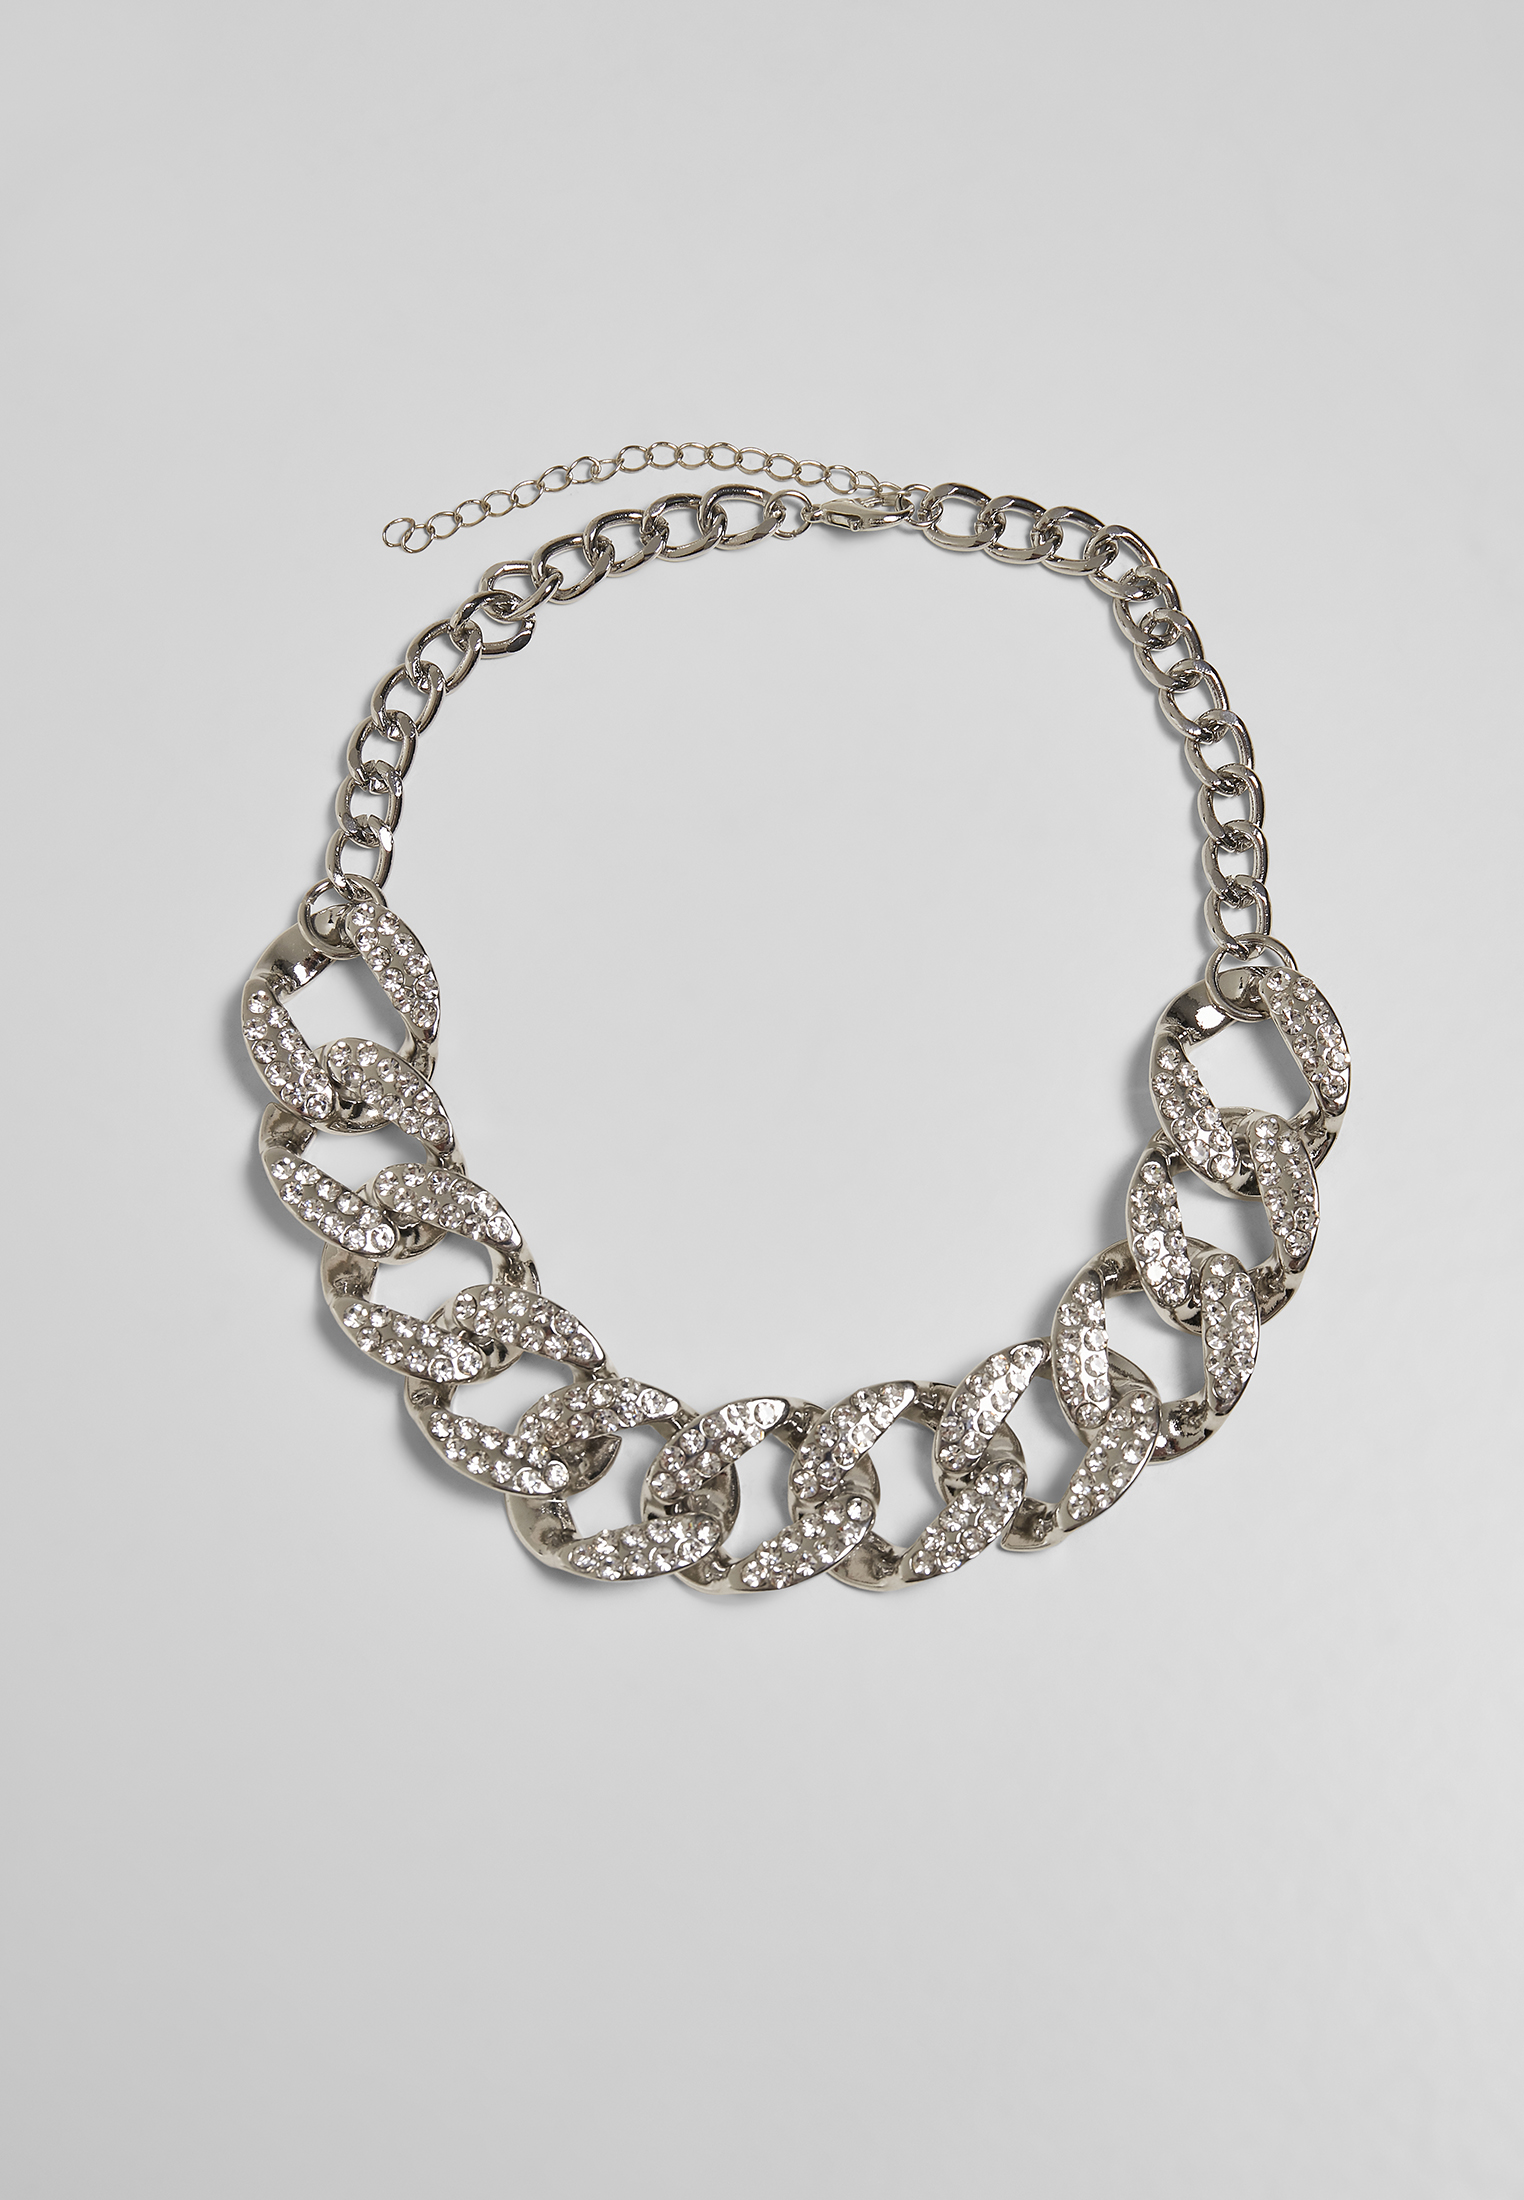 Statement necklace - silver color